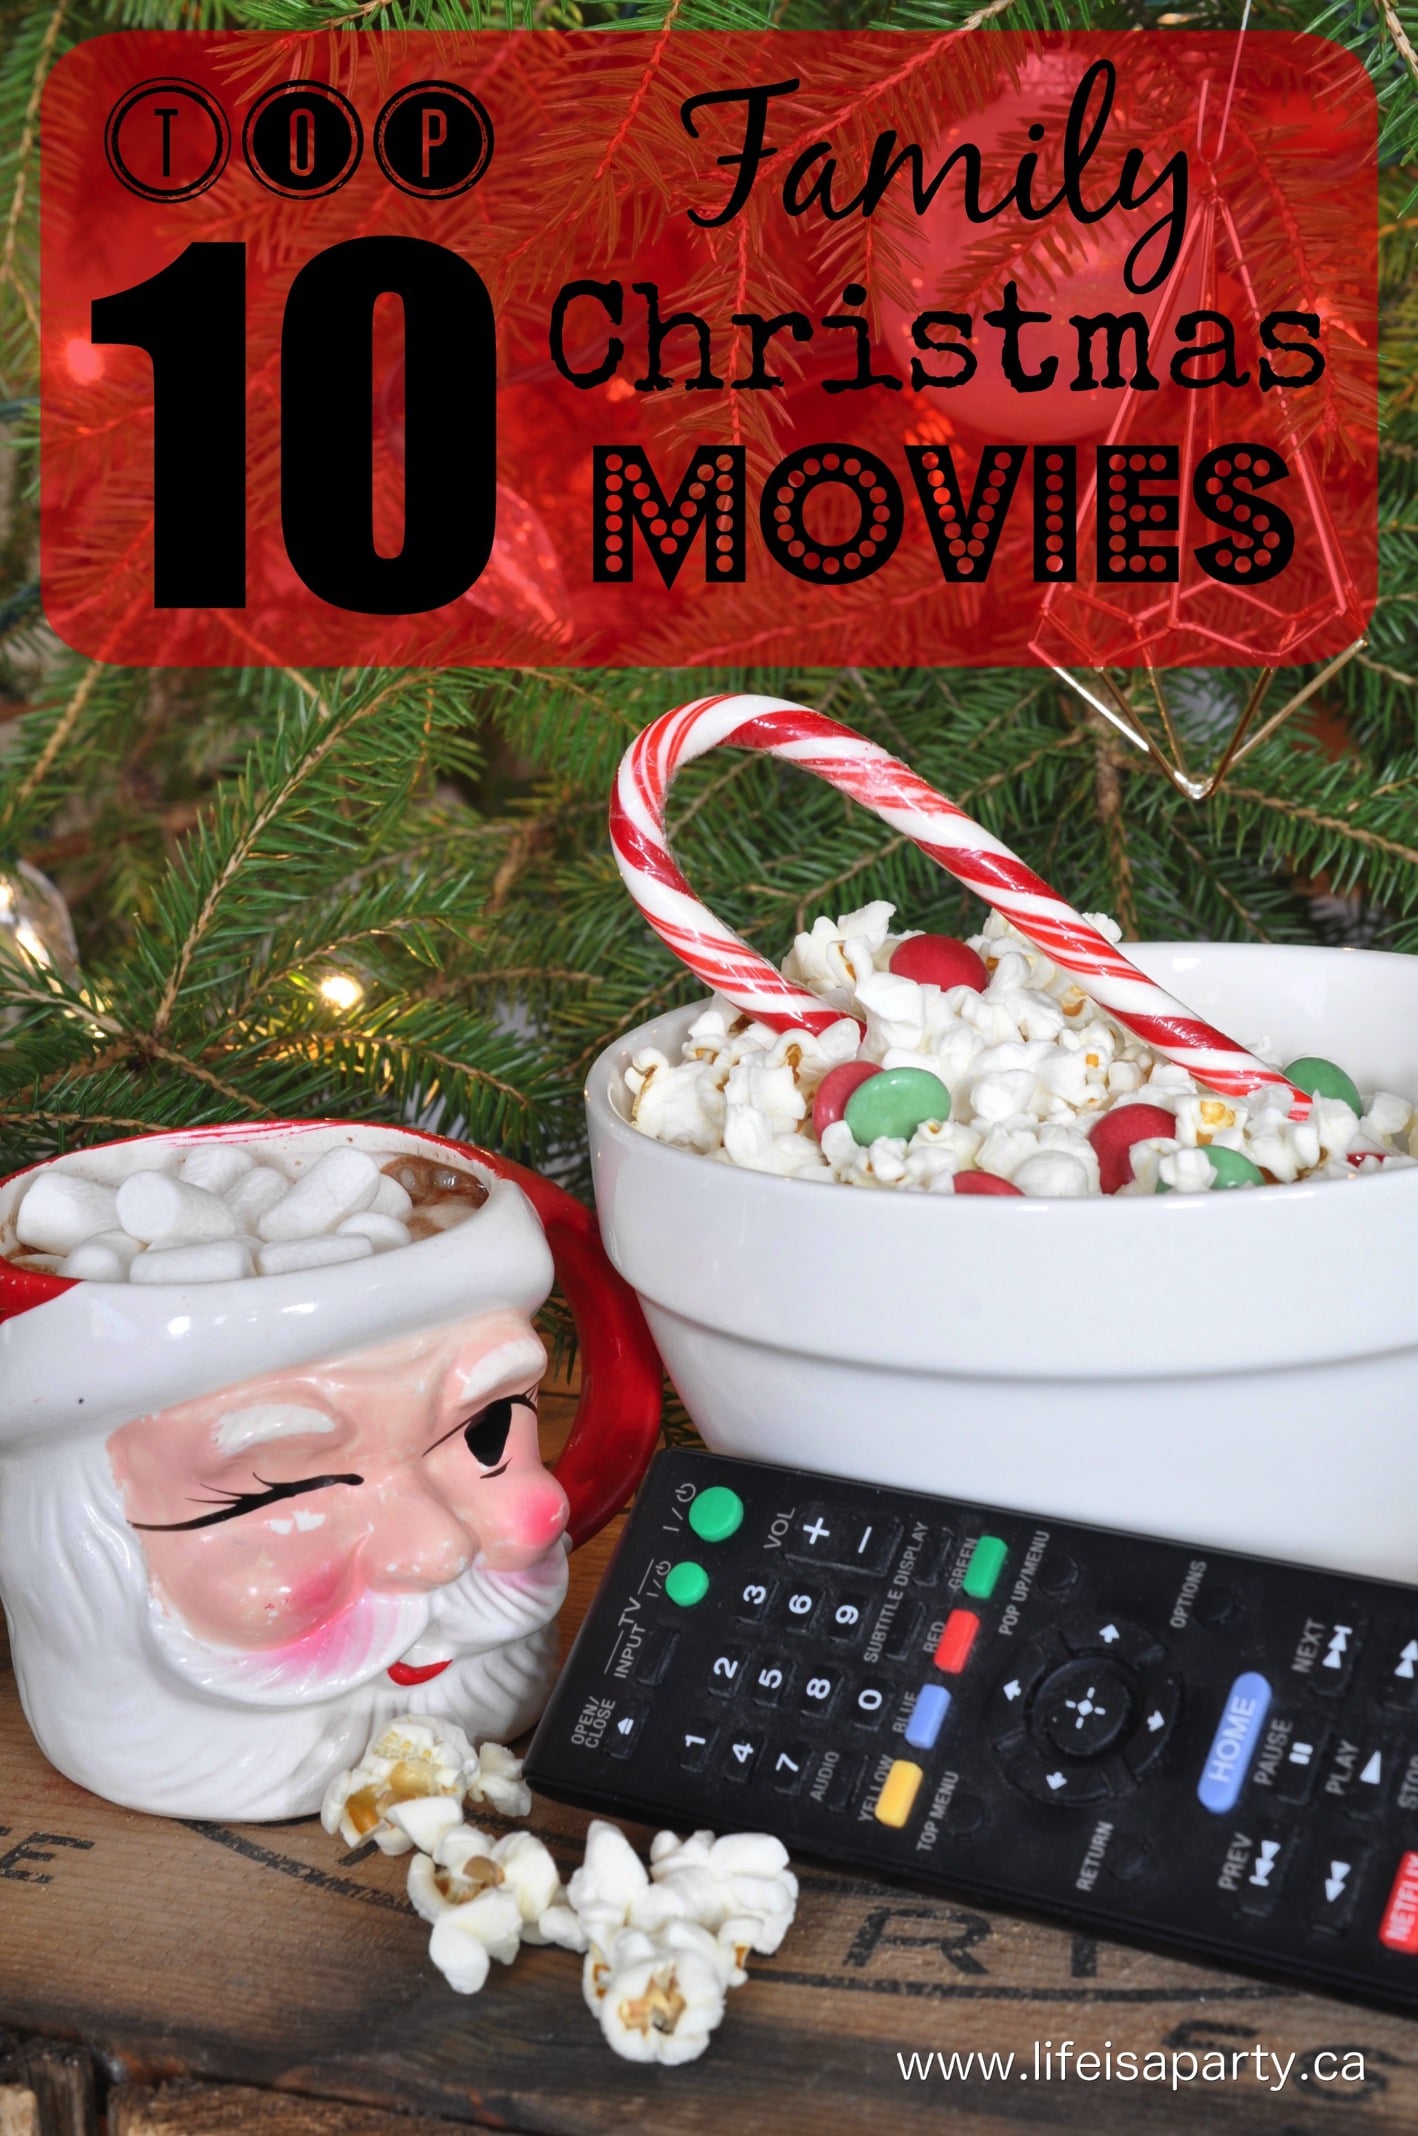 Top 10 Family Christmas Movies: The best holiday movies that the whole family will love. Perfecct to enjoy a family movie night this Christmas.